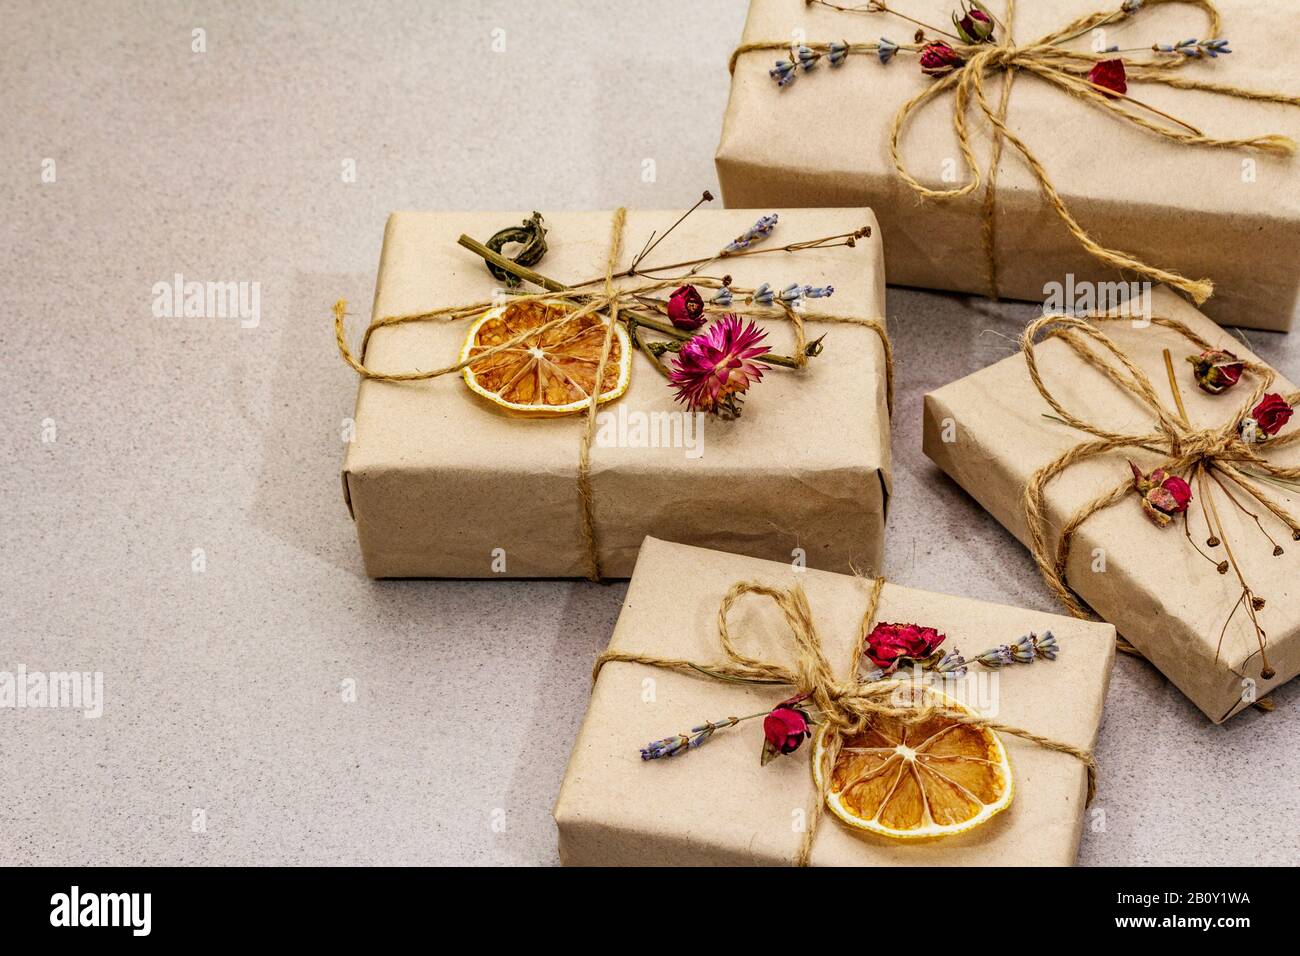 10 eco-friendly gift-wrapping ideas | MiNDFOOD